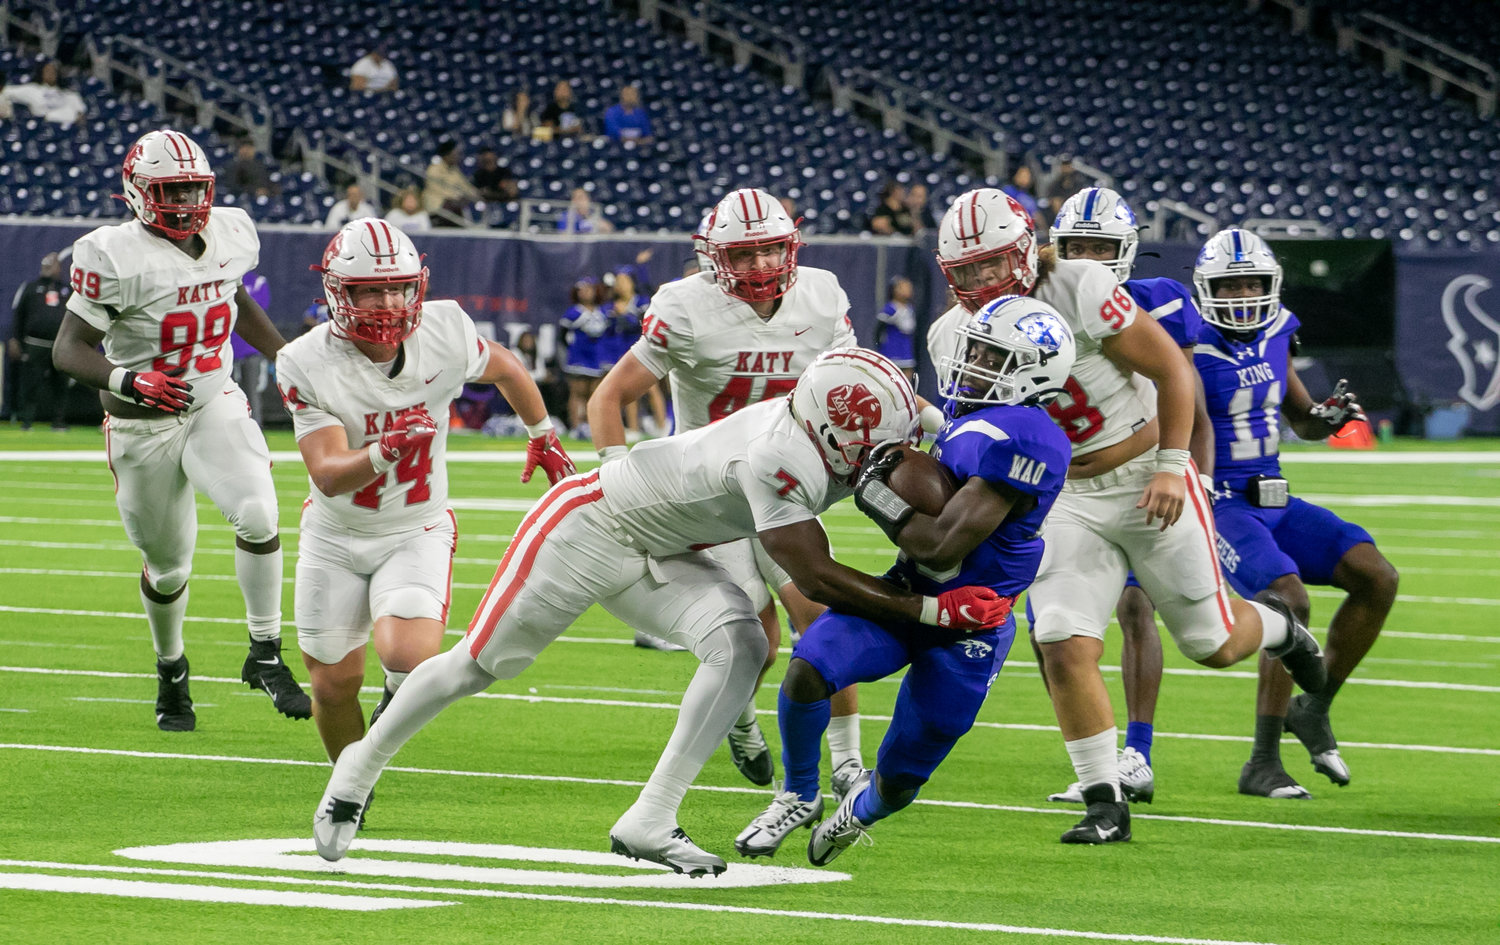 Katy's Johnathan Hall makes a tackle during a Class 6A-Division II Region III Final between Katy and C.E. King at NRG Stadium.